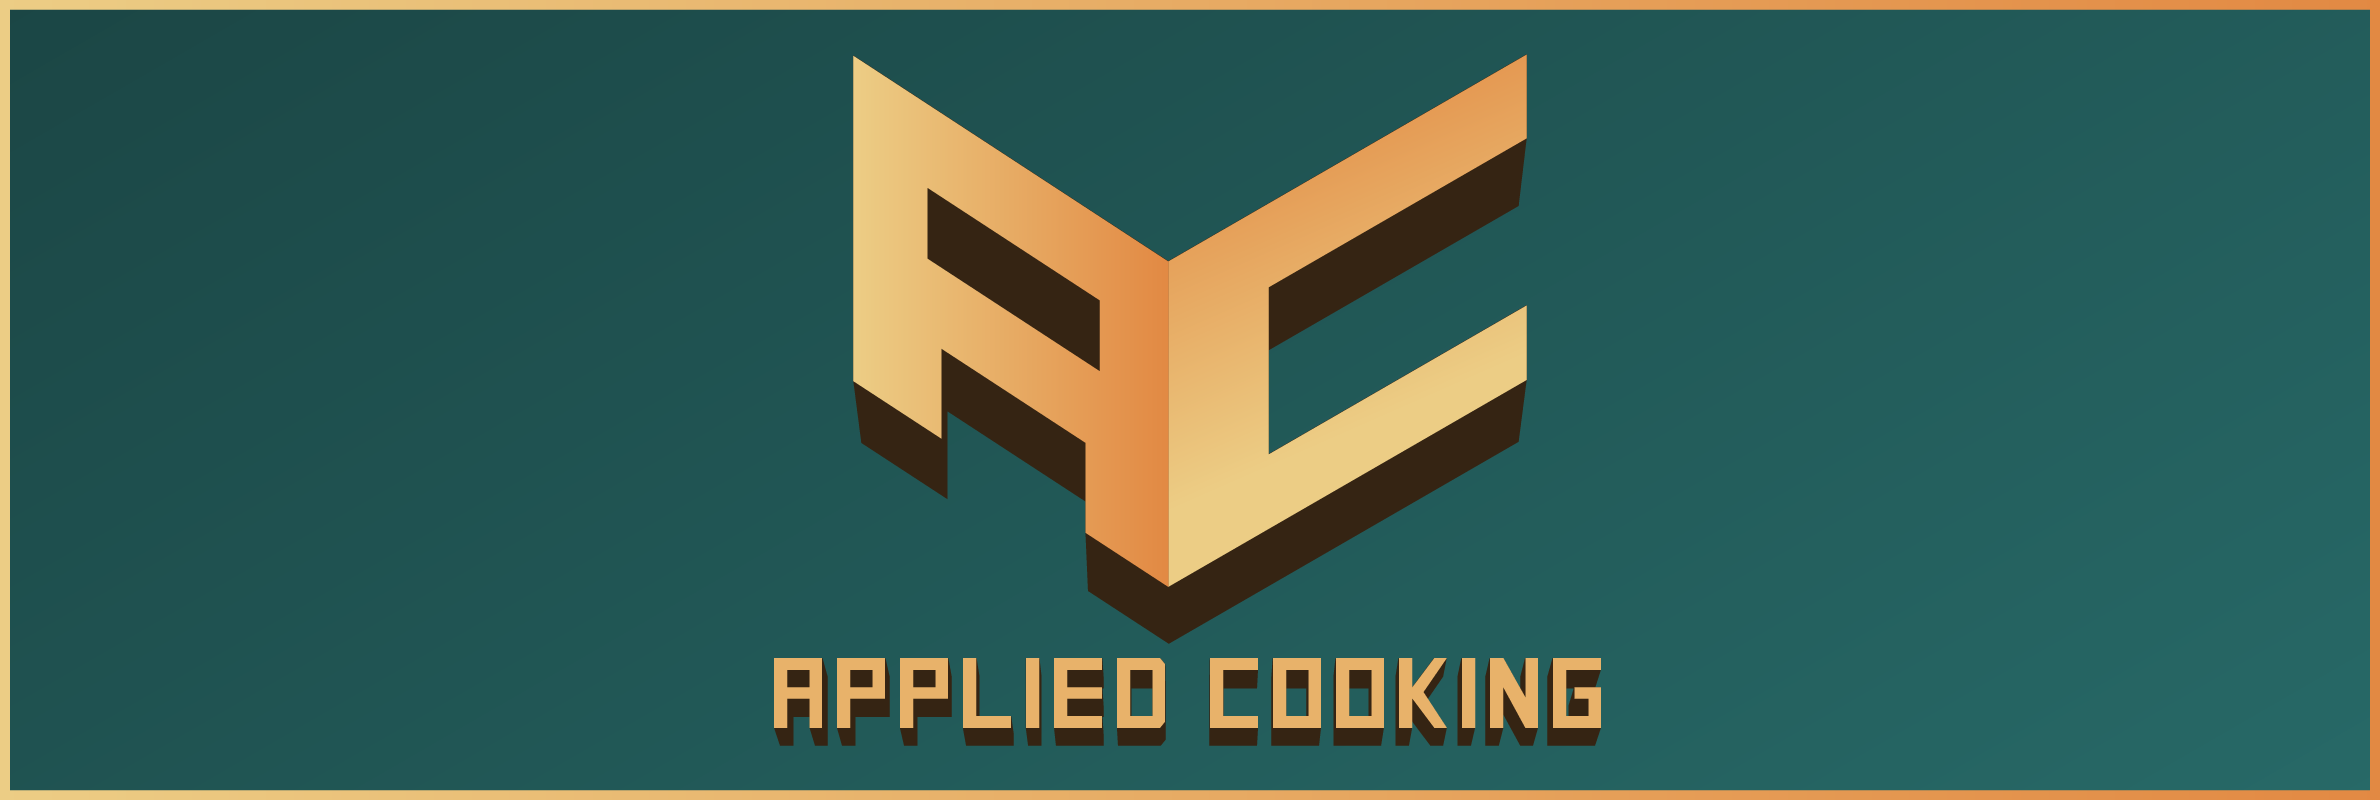 Applied Cooking Header